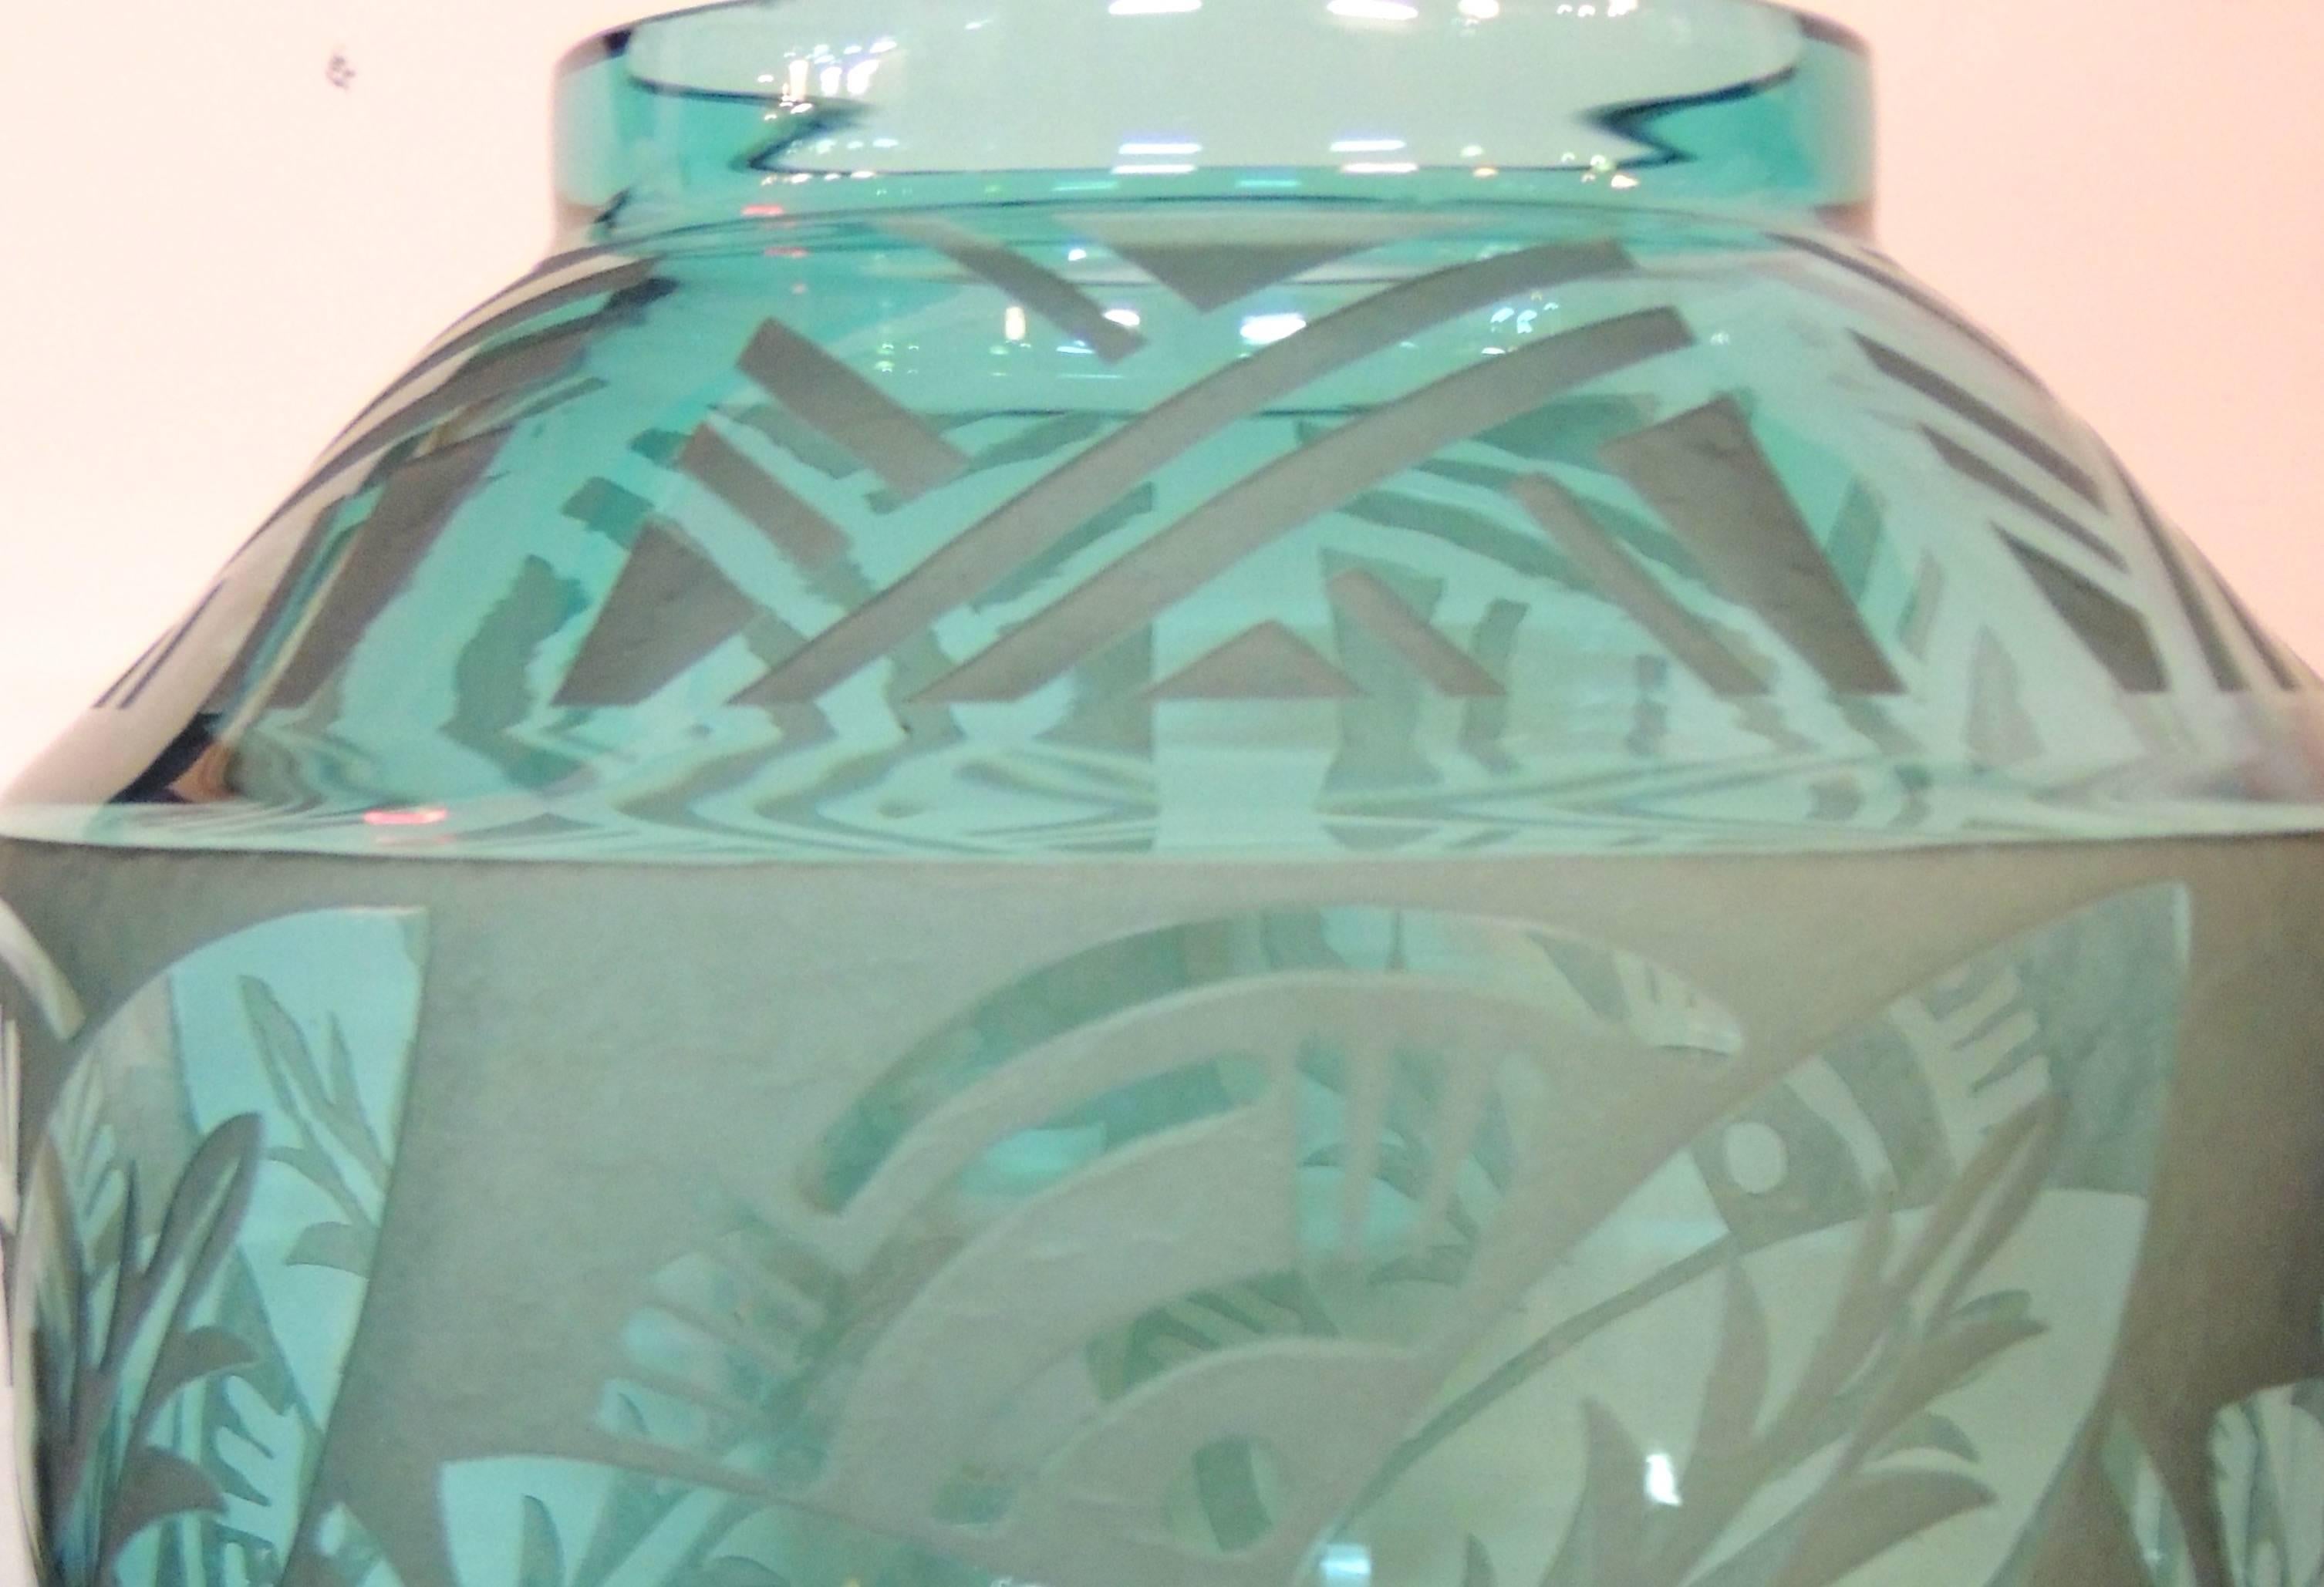 This turquoise Daum vase has an Art Deco etched design on glass of a most unusual color and clarity. The modernist tropical motif would fit in well in a South Beach apartment or a contemporary condo. It bears the signature of one of the most famed